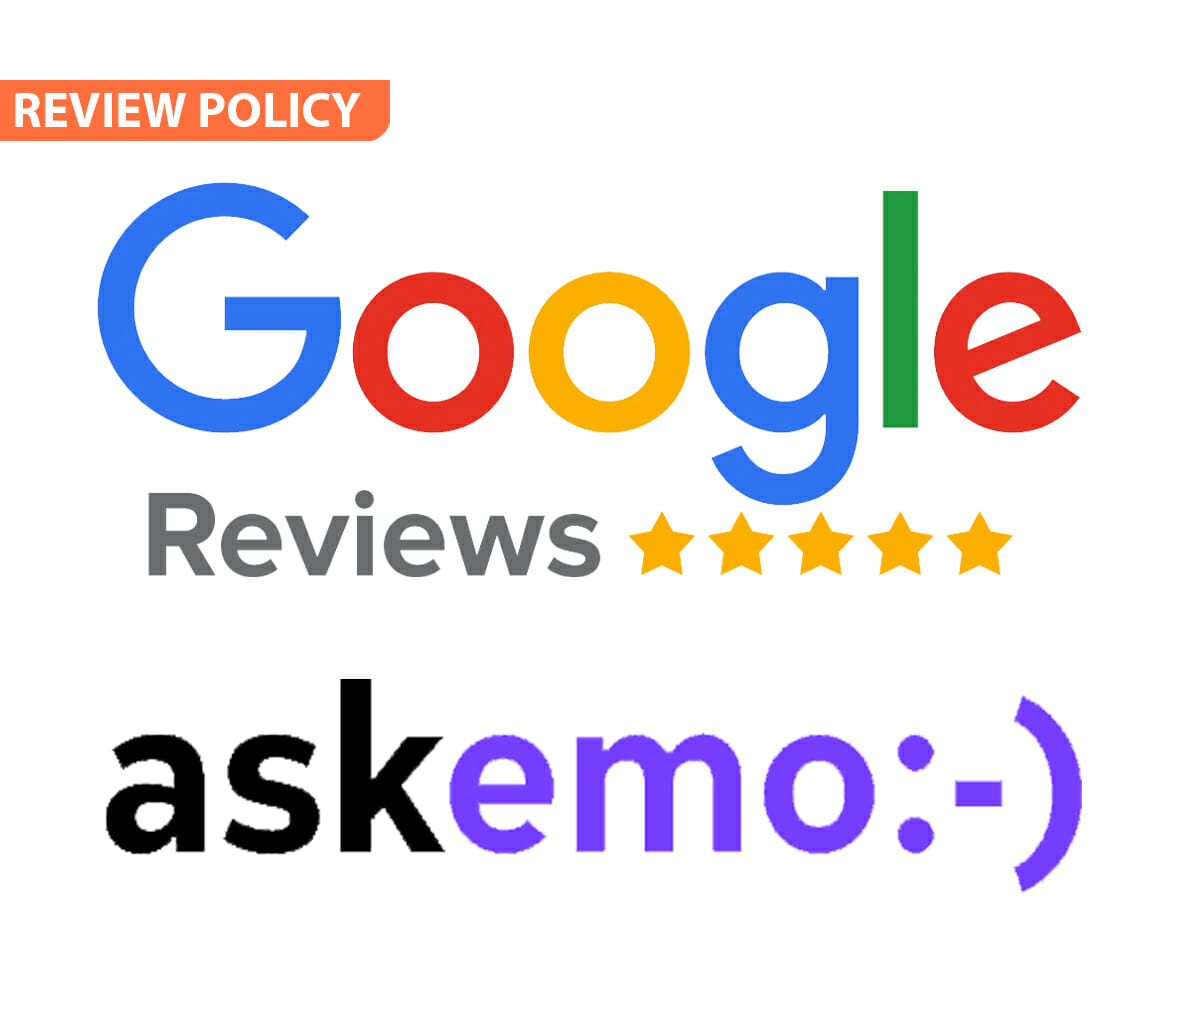 Review policy